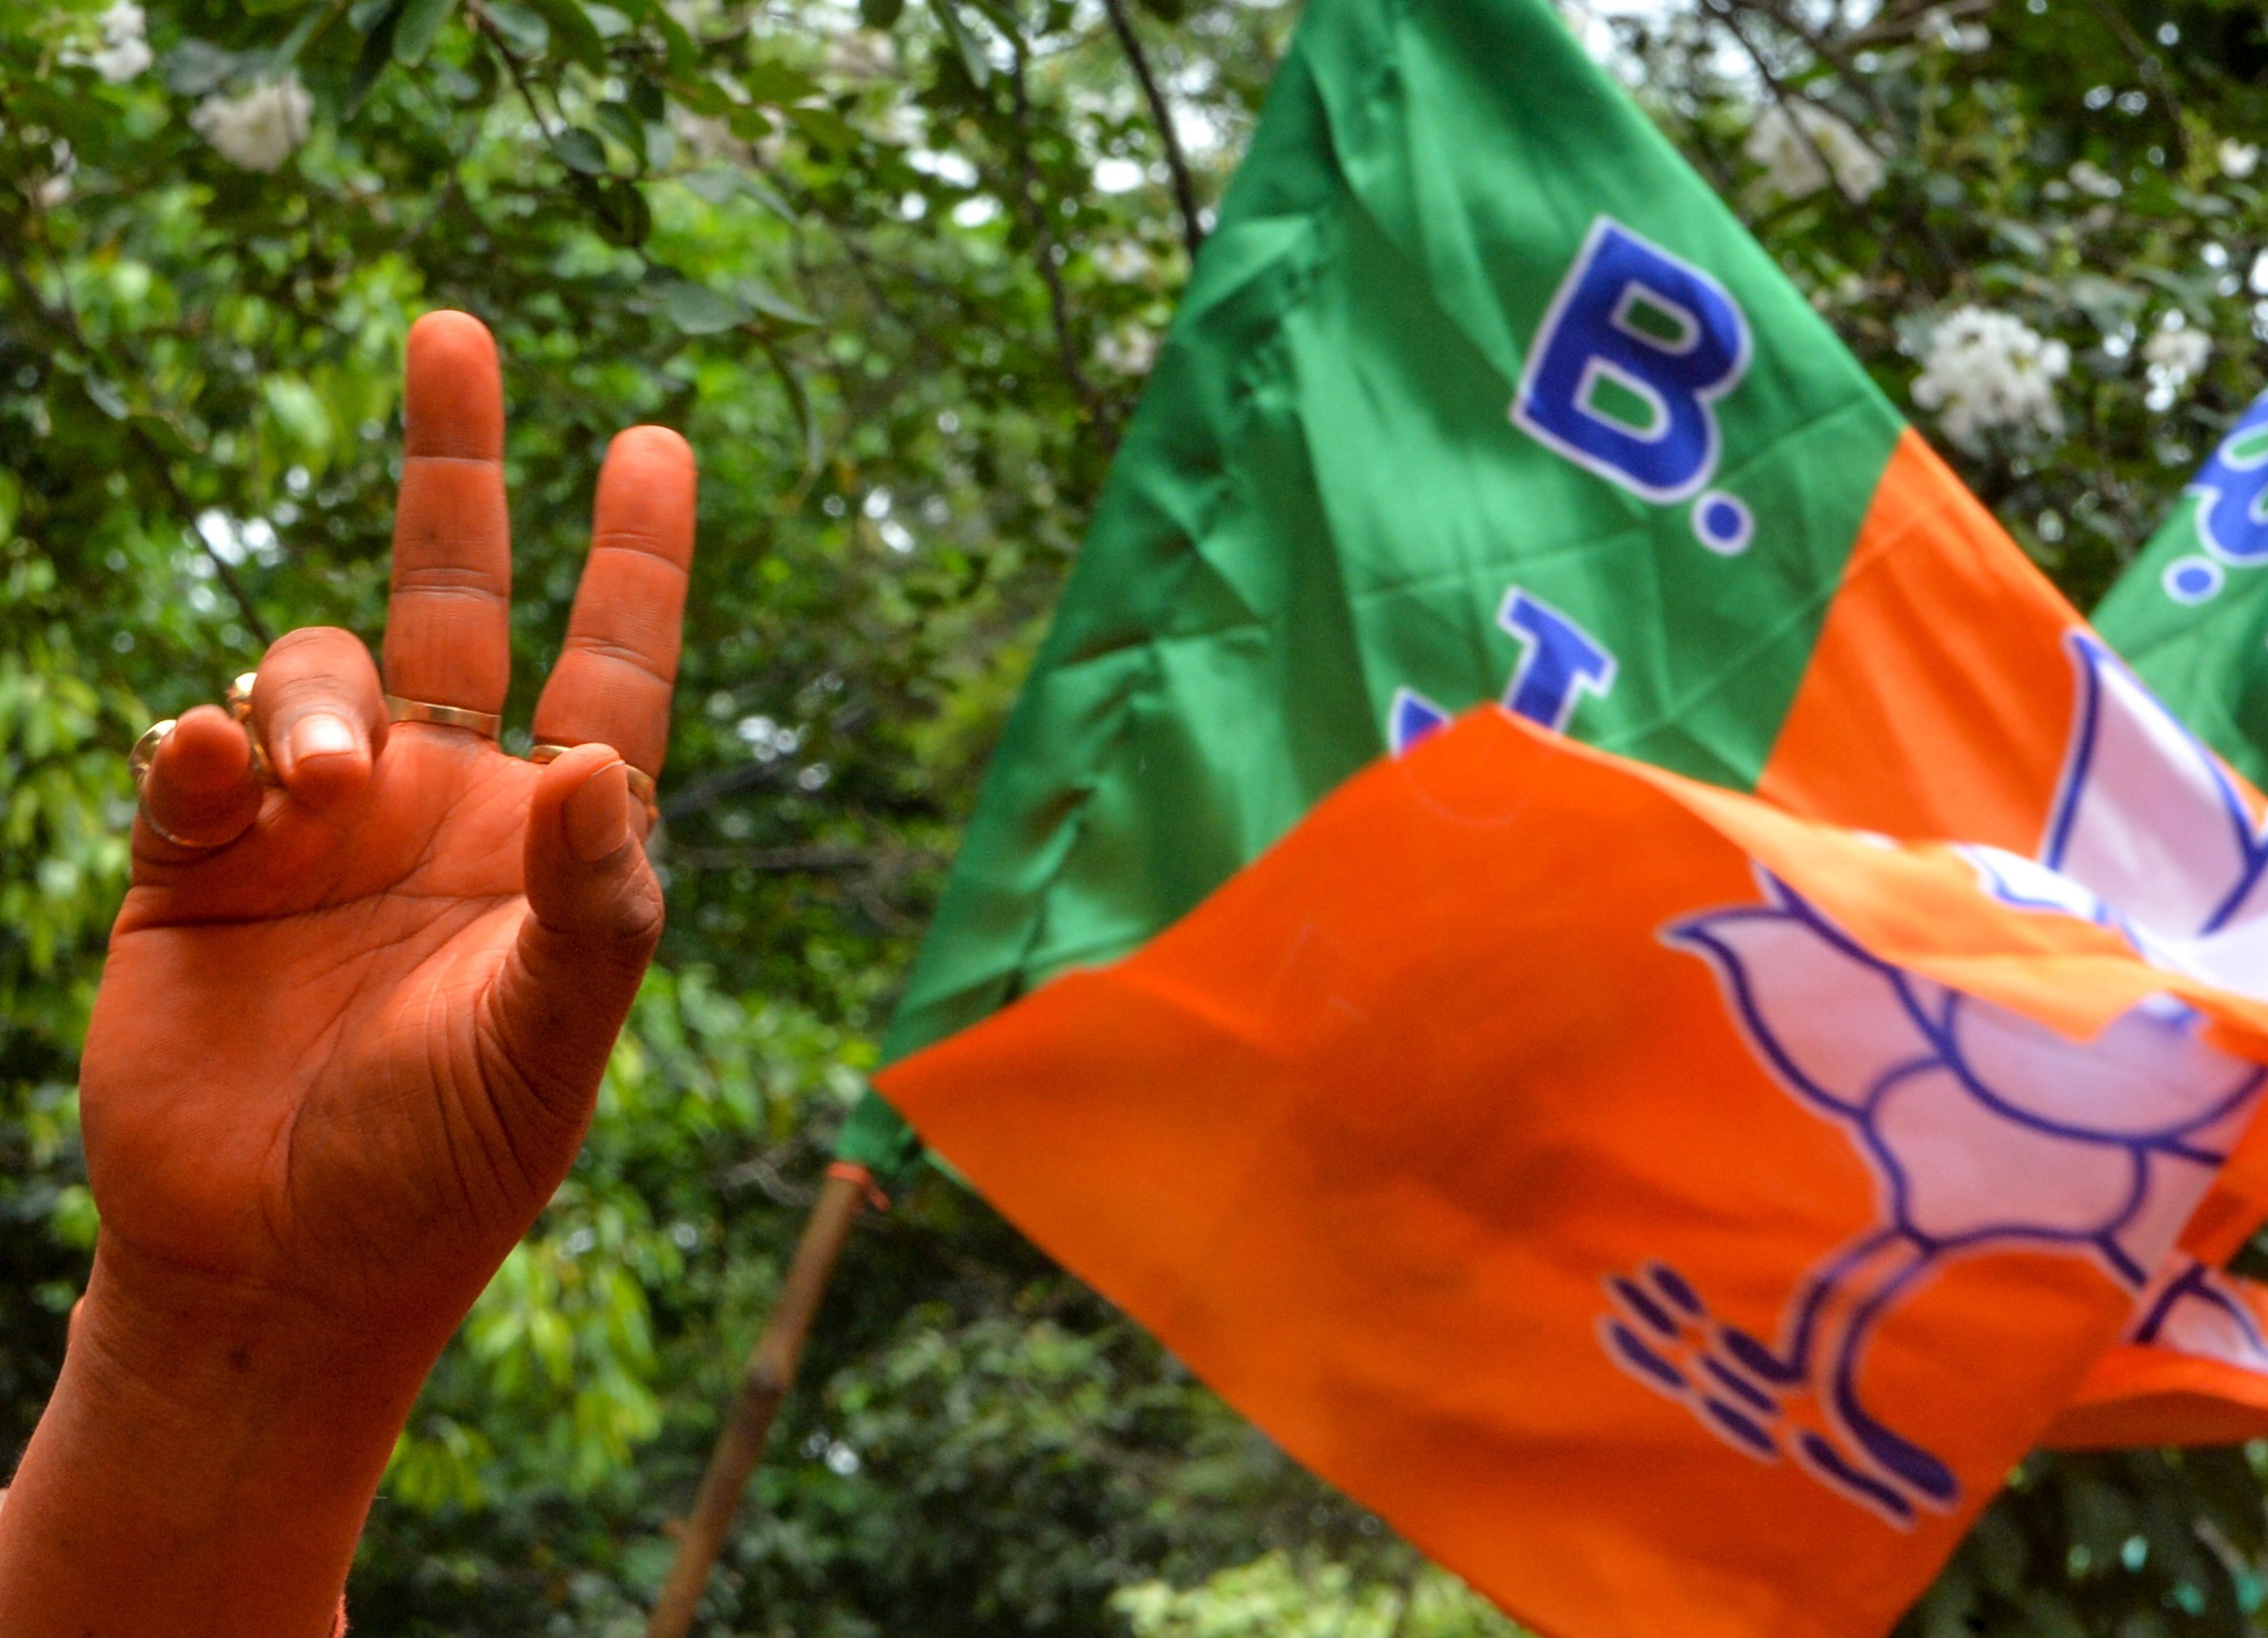 According to BJP sources, at present, seven such trade unions are there in the state claiming to be affiliated to the saffron party and the leadership is apprehensive that such activities may malign the party’s image. (Photo by DIPTENDU DUTTA / AFP)